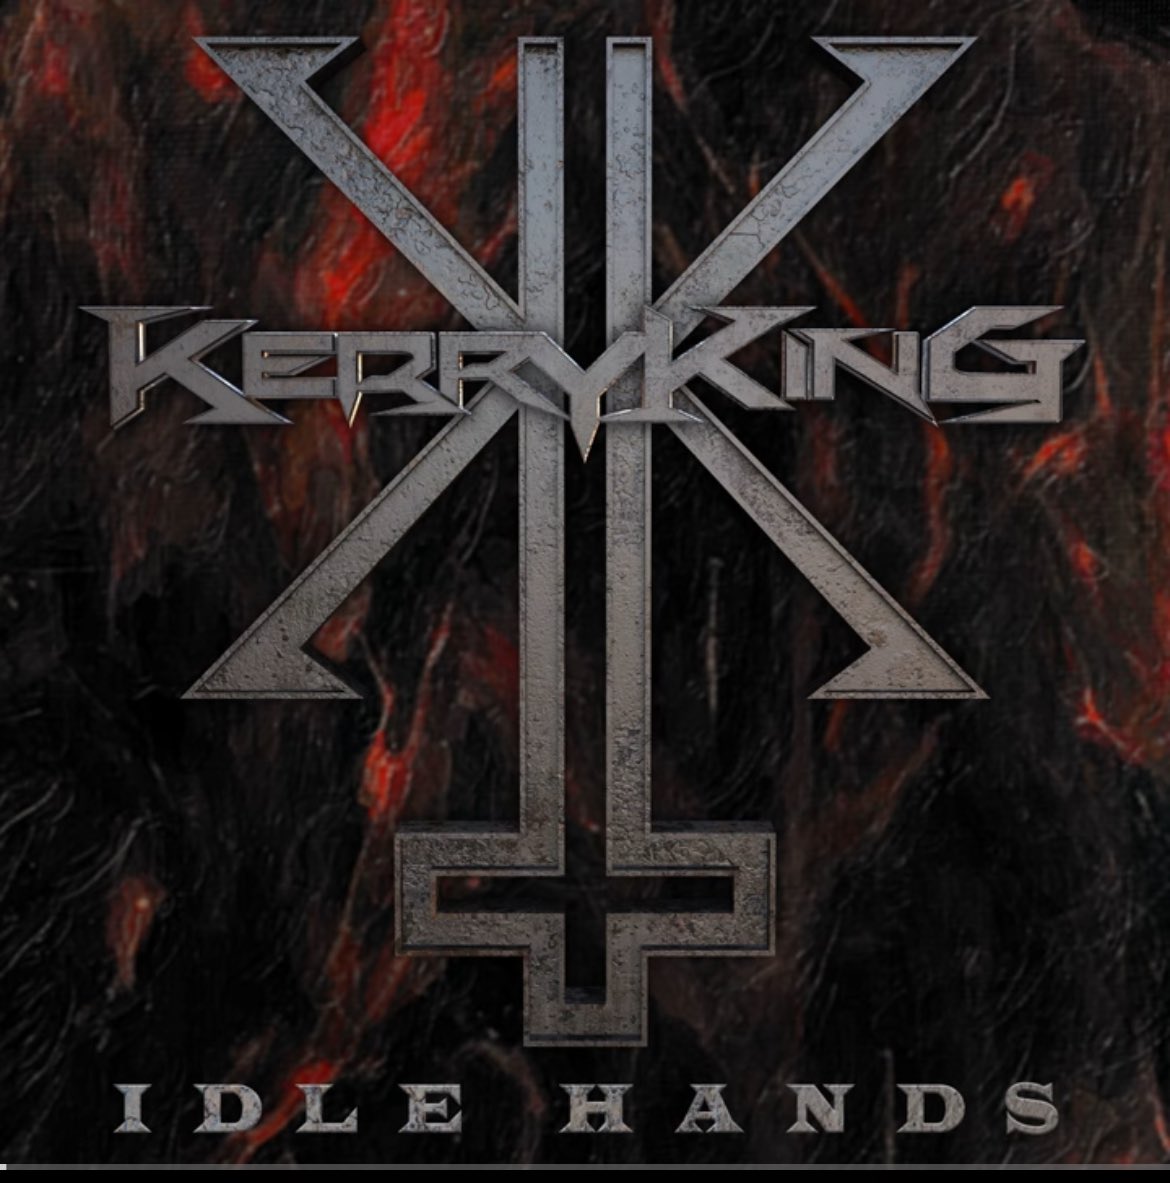 Kerry King - Idle Hands Sounds exactly how I expected it to sound. Not sure if I’m pleased at the consistency/reliability or bored by the sheer predictability 🤔 youtu.be/QBp7cyWGCEE?si…